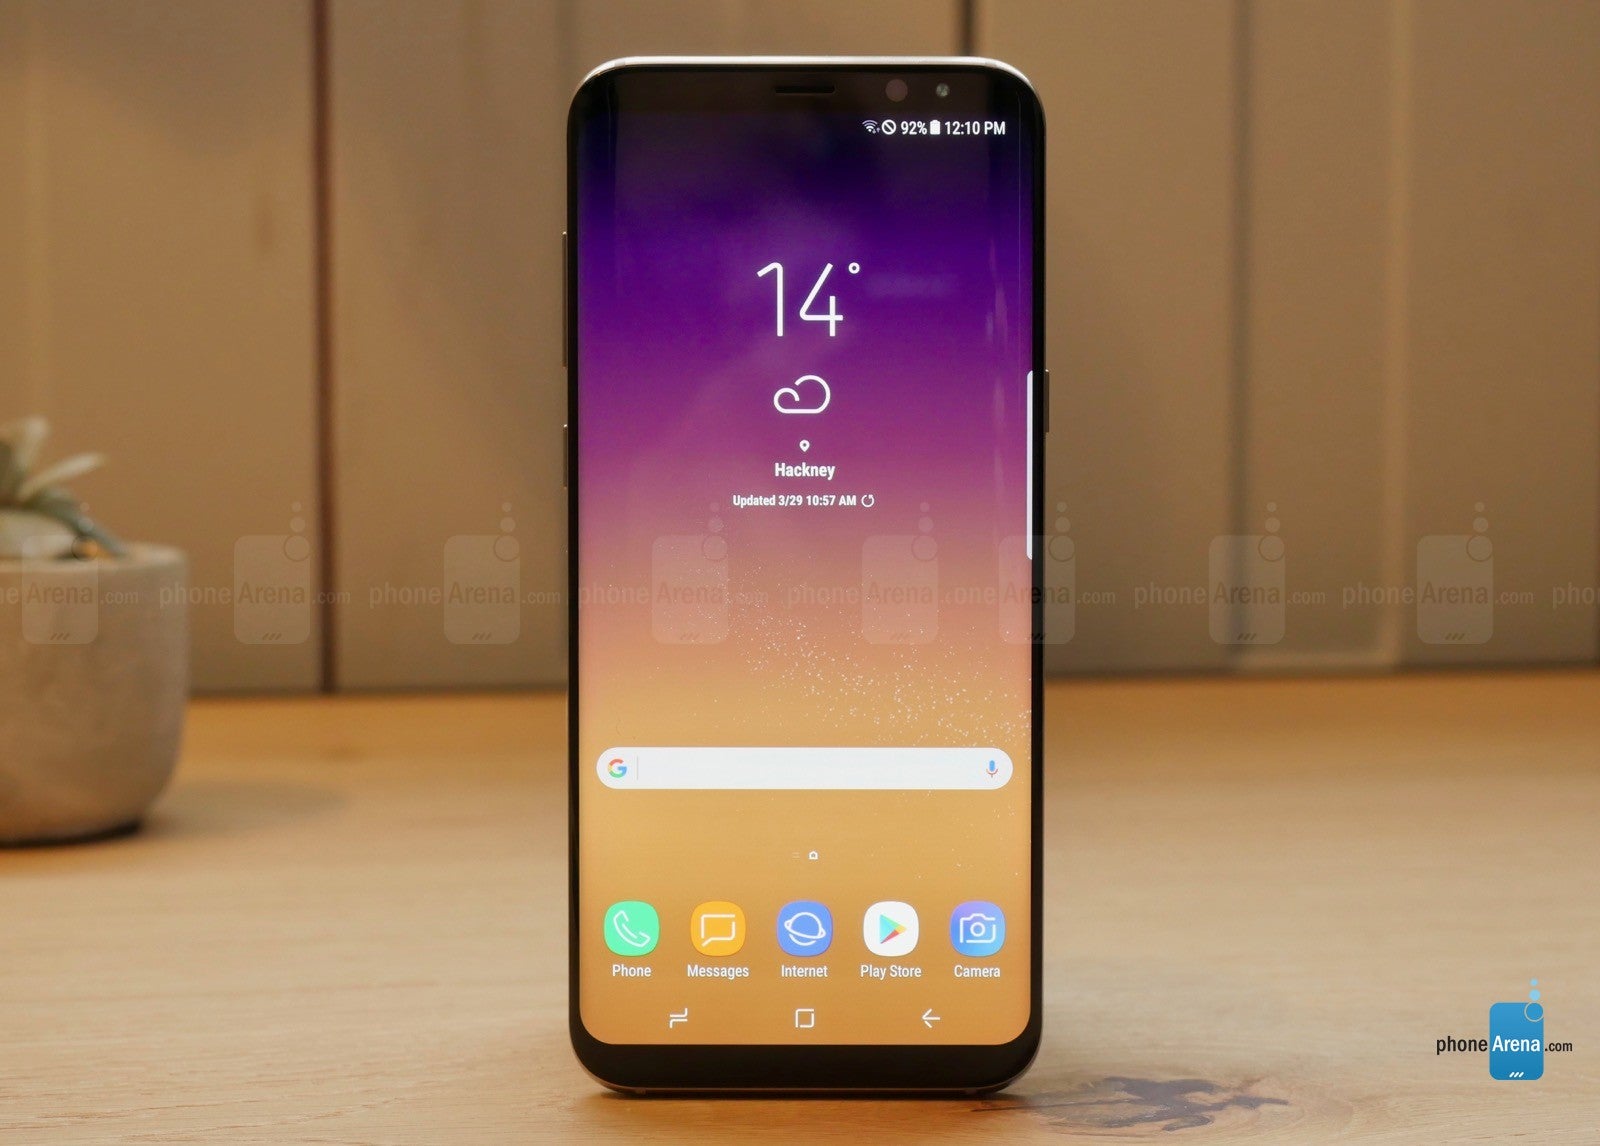 Samsung Galaxy S8 and Galaxy S8+ hands-on: there's never been smartphones like these before